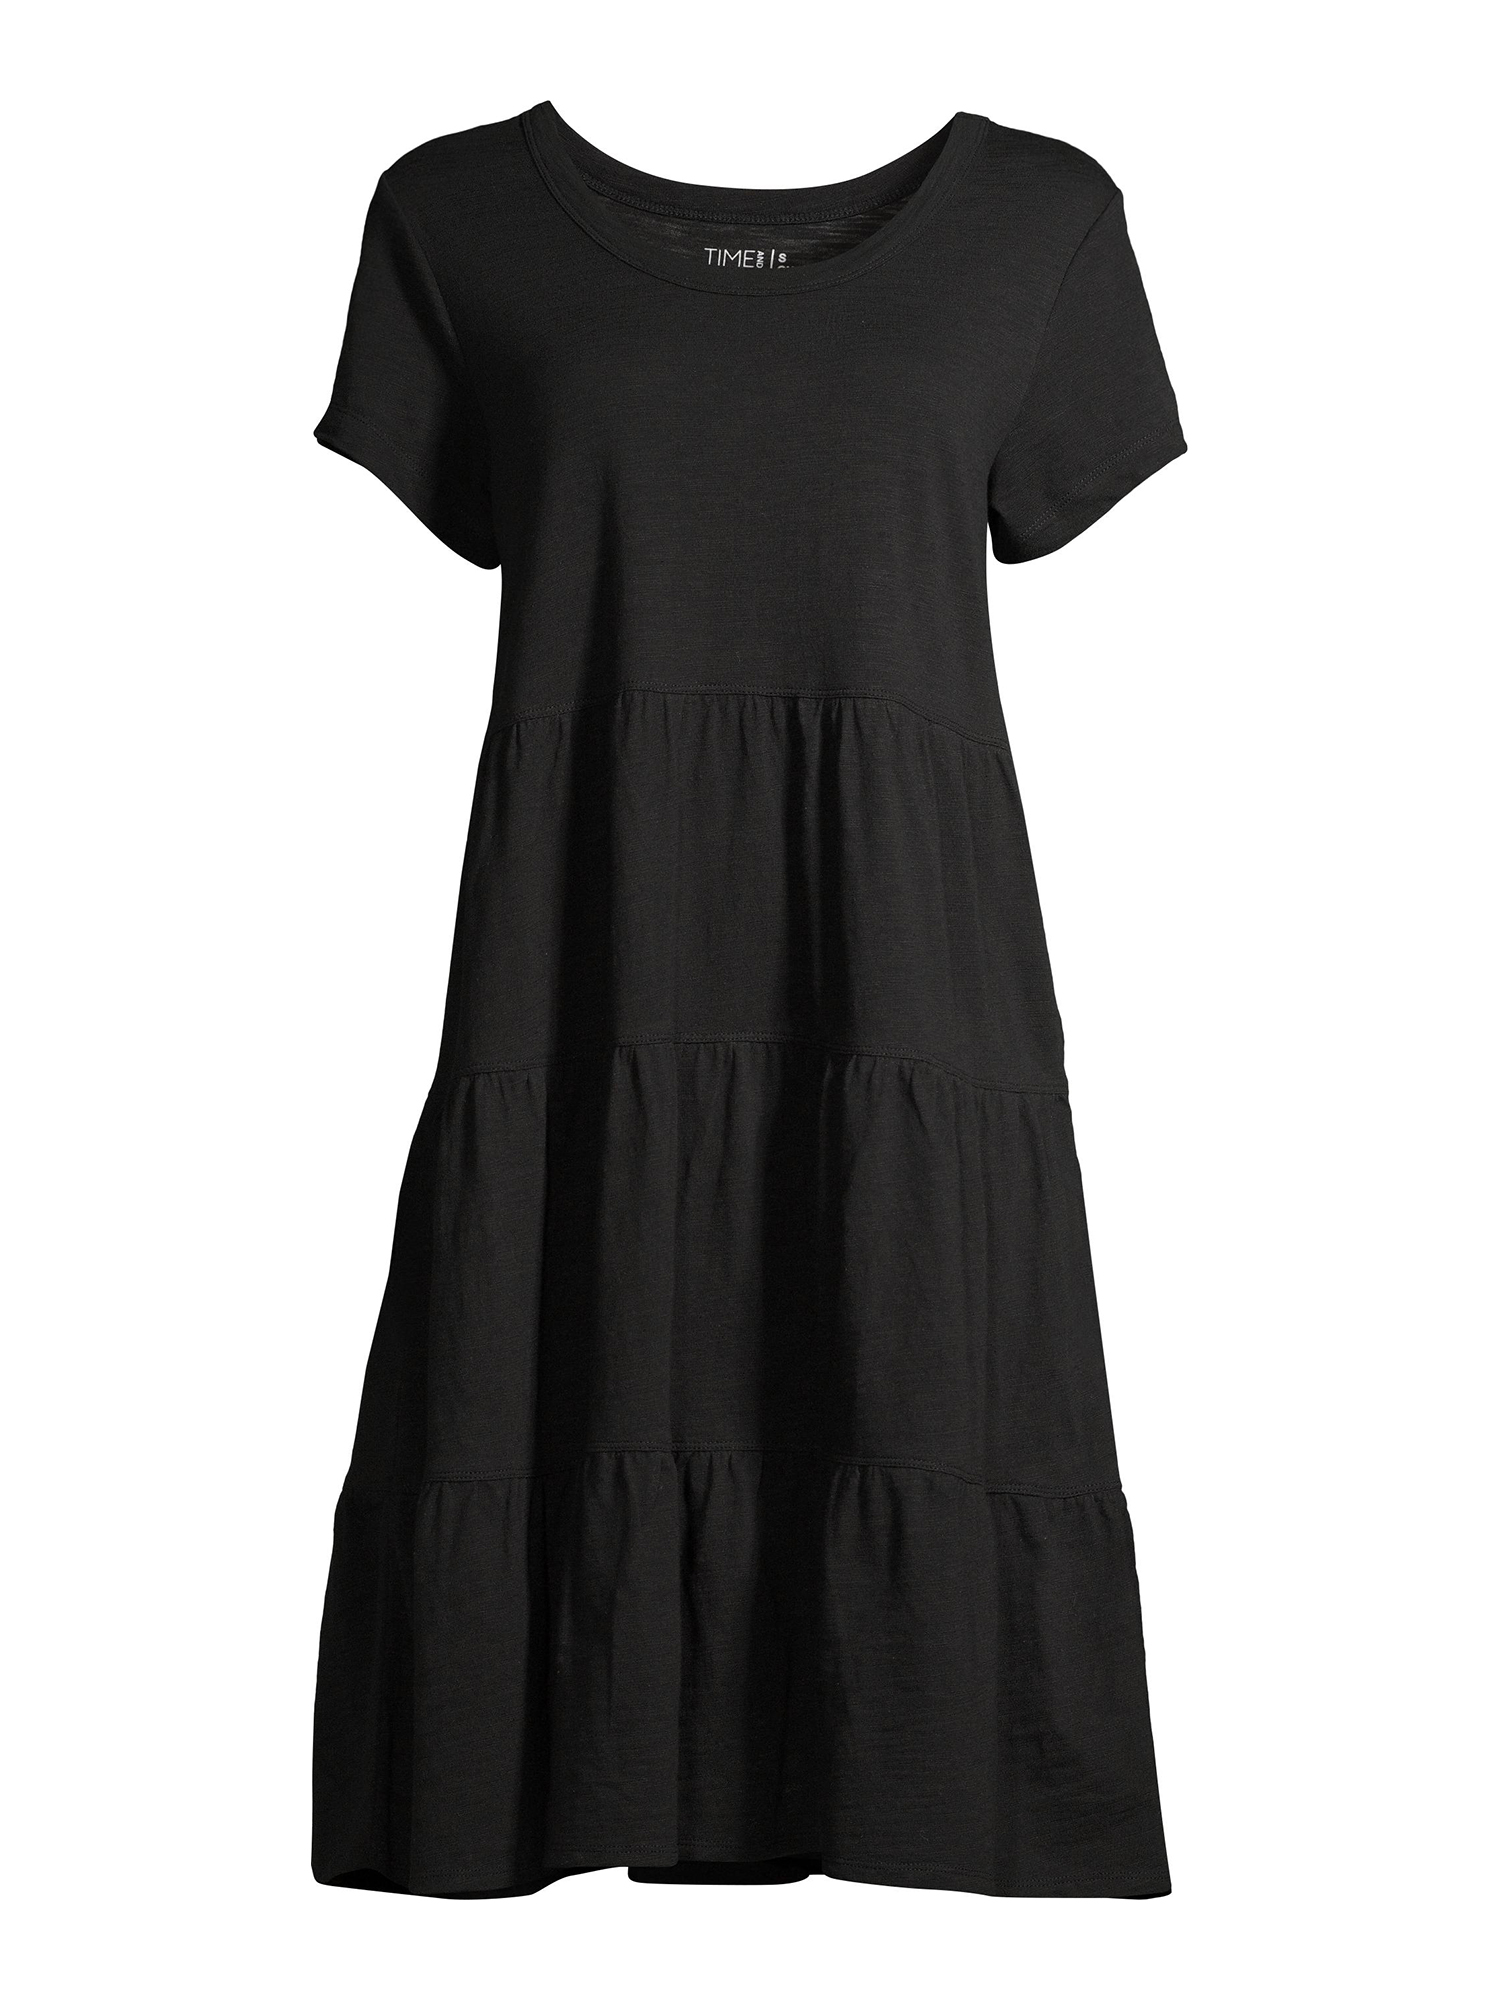 Time and Tru Women's Tiered Knit Dress - image 3 of 6